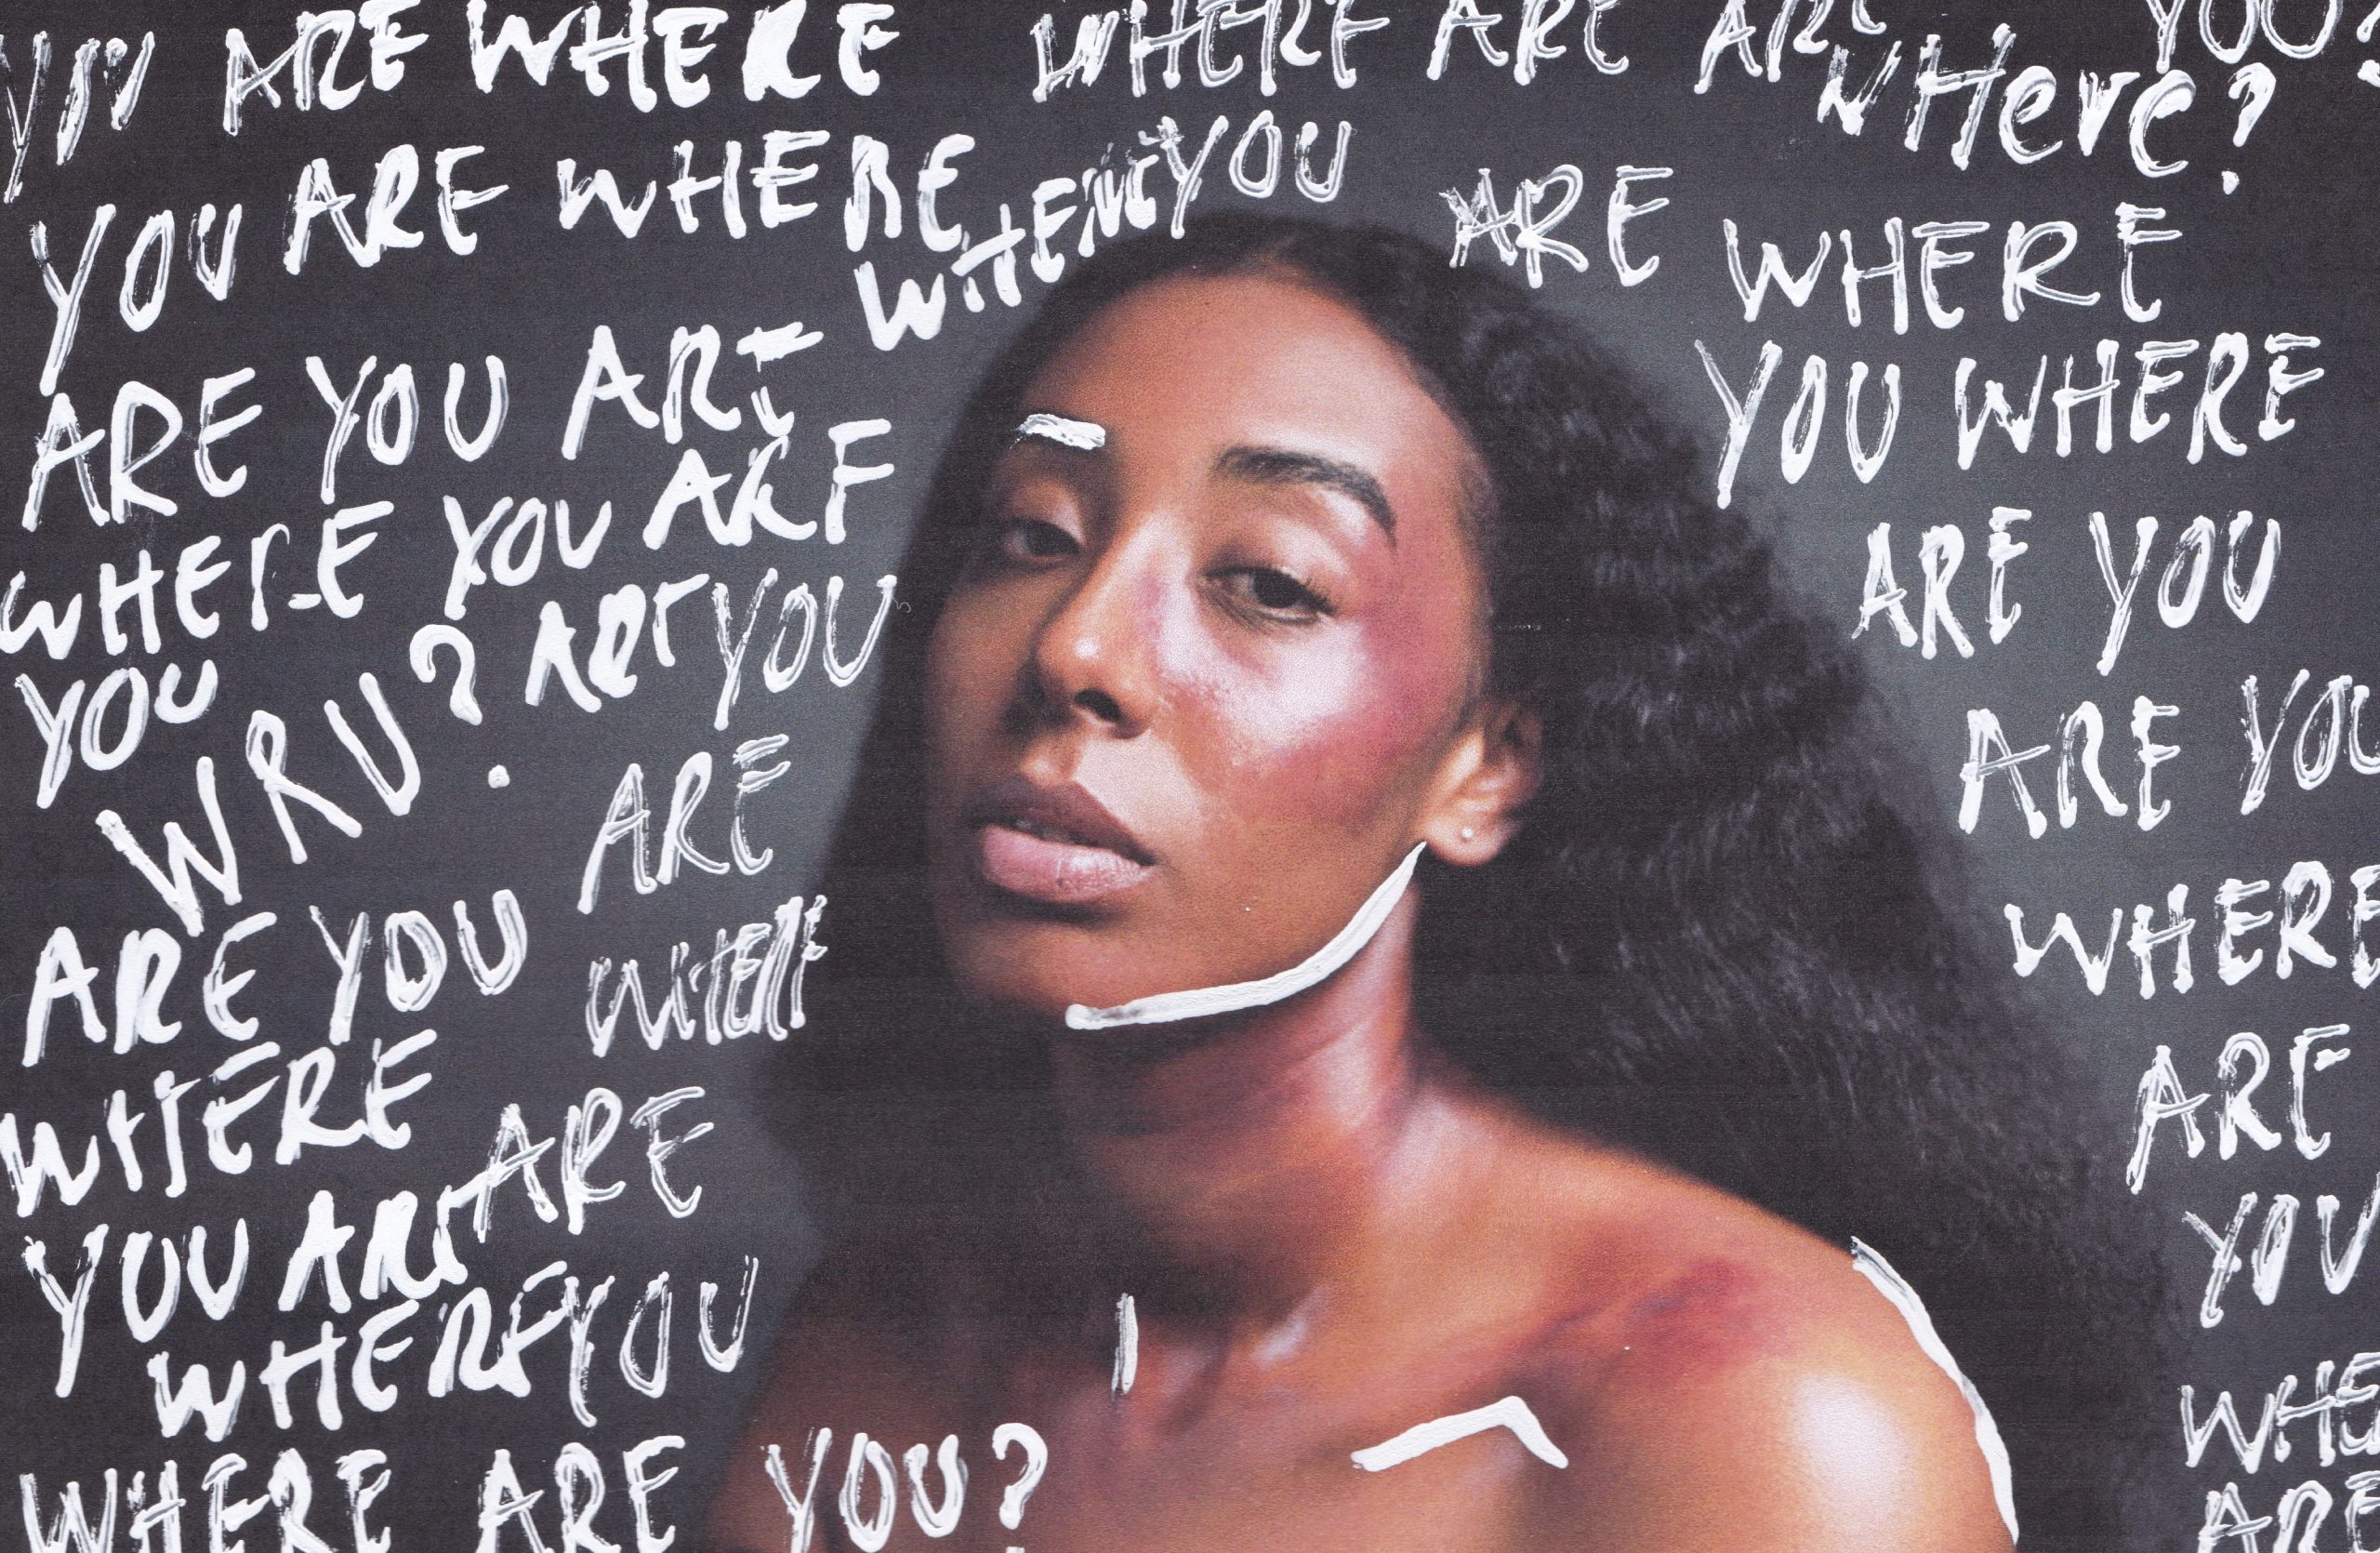 ABI OCIA CONFRONTS HERSELF IN STUNNING ALBUM, ‘WHERE ARE YOU?’